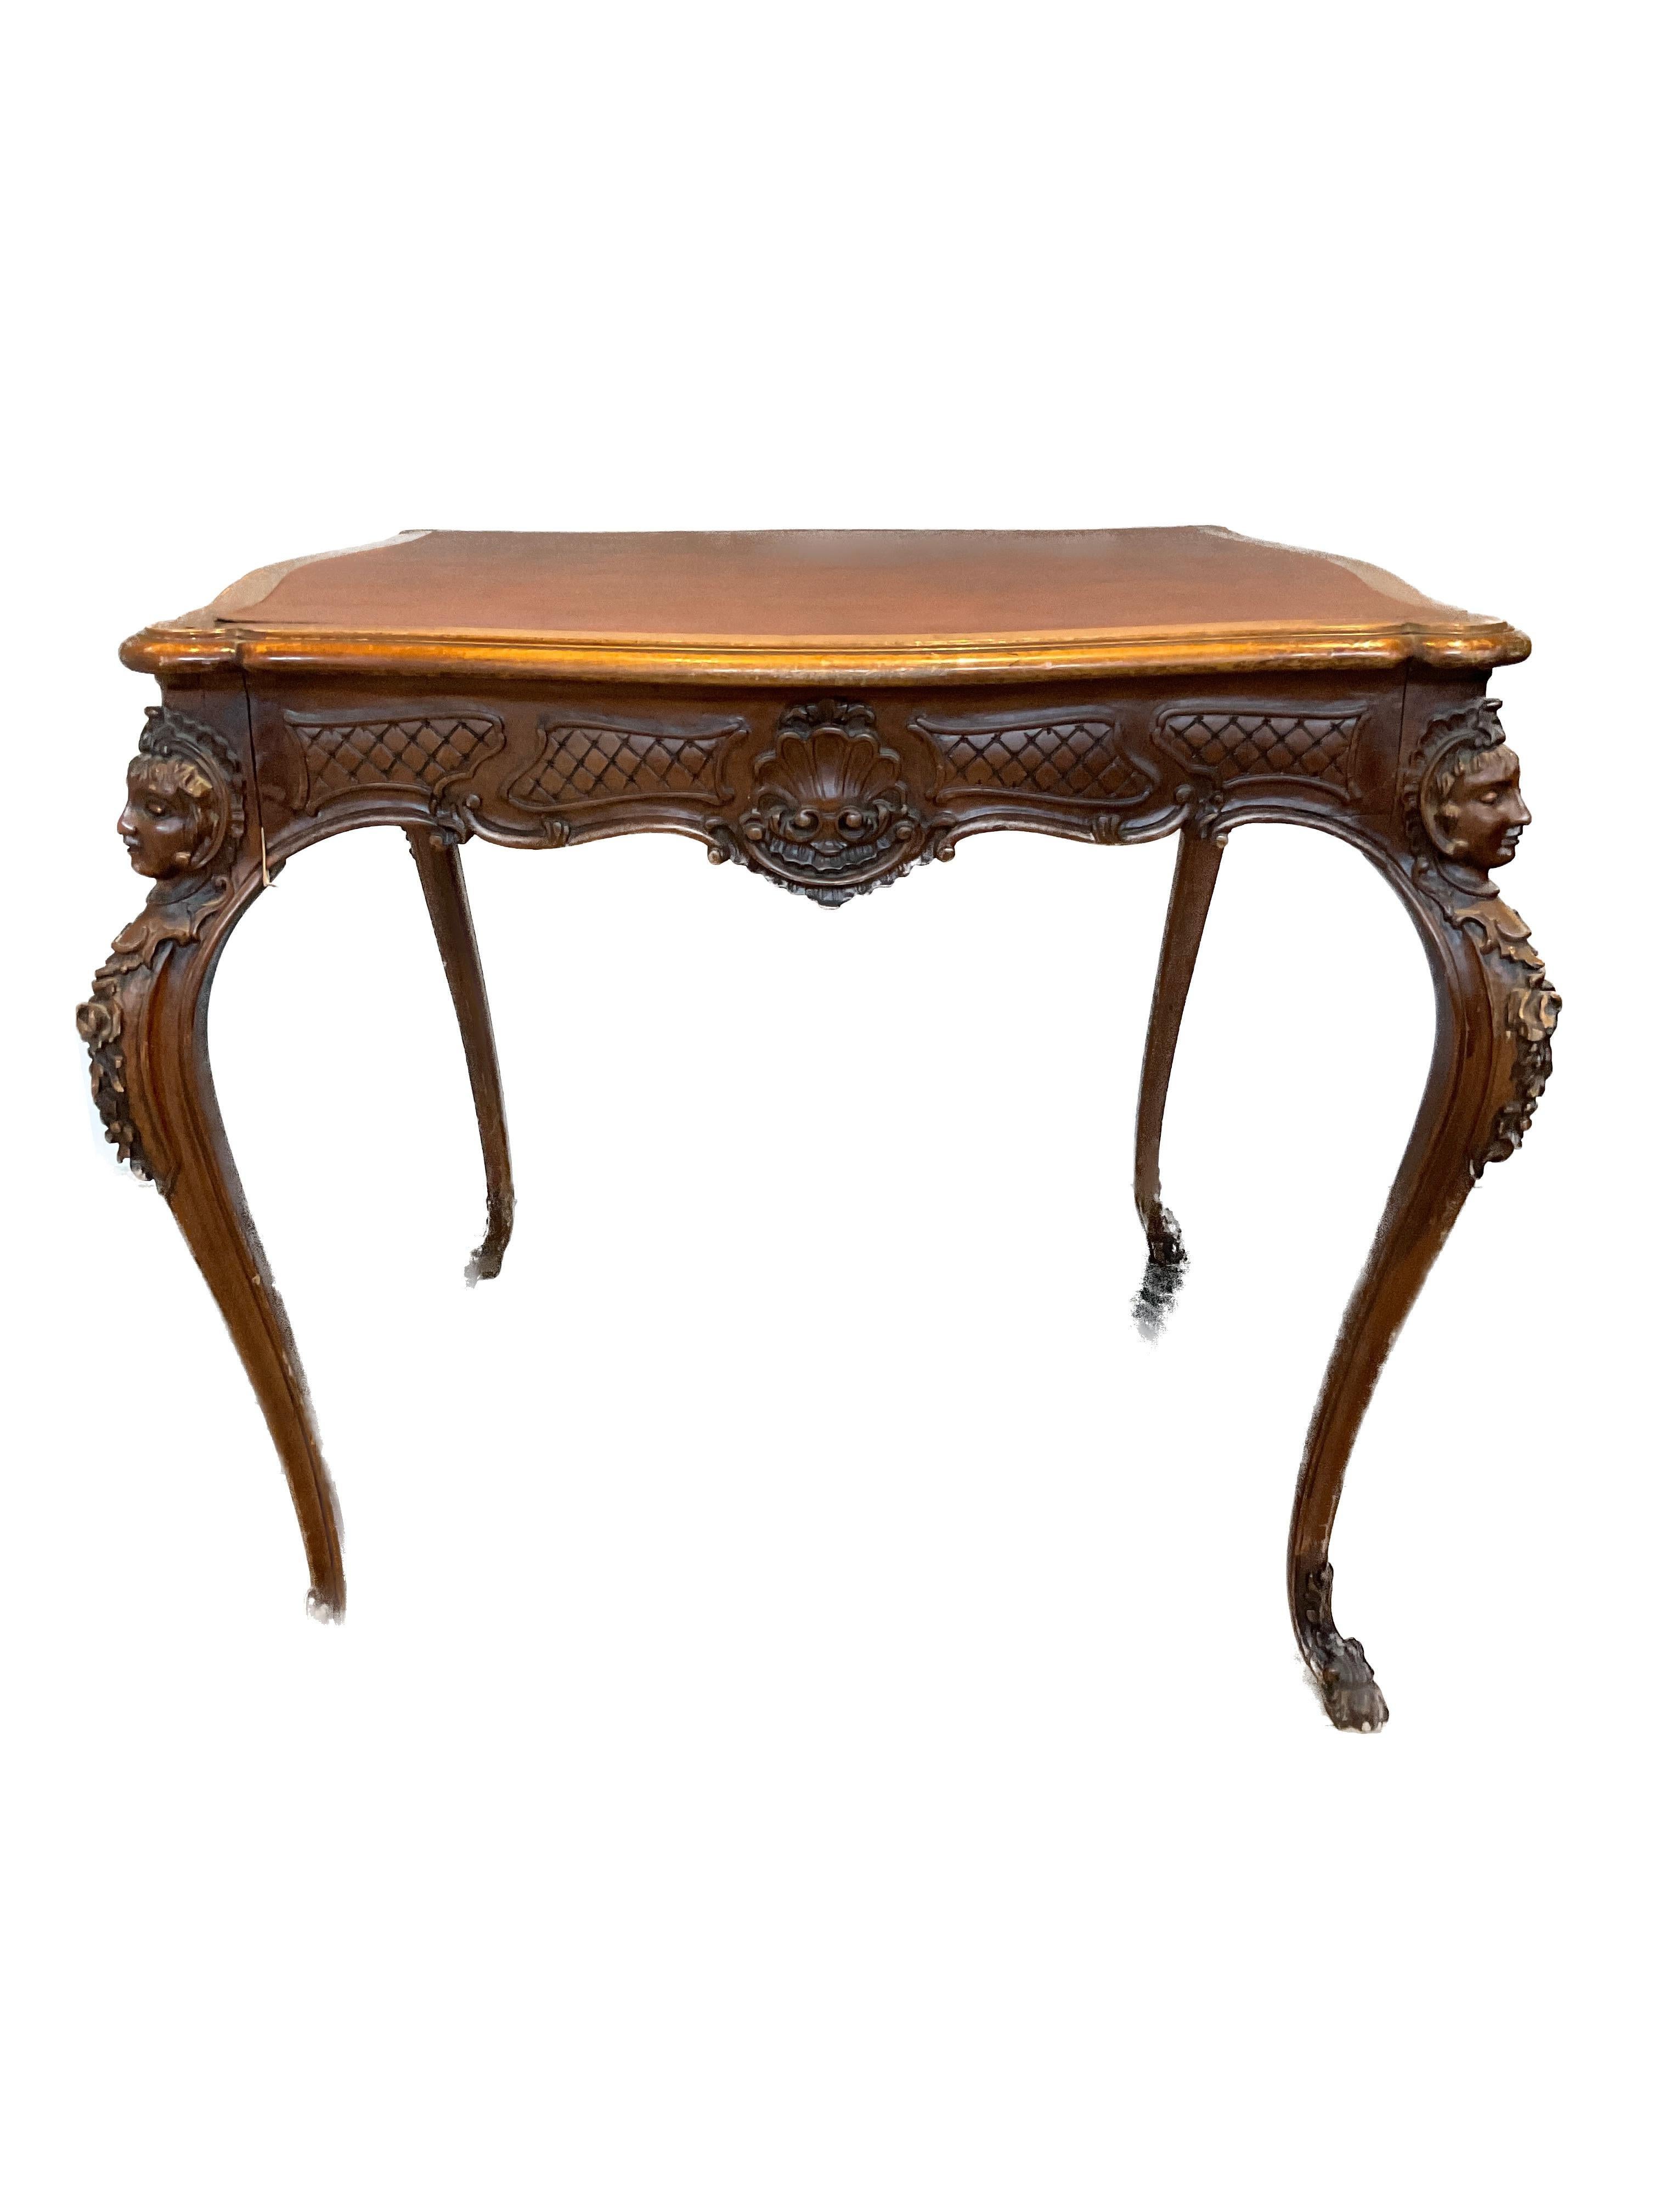 1950s Italian Carved Wood Rococo Game Table For Sale 1